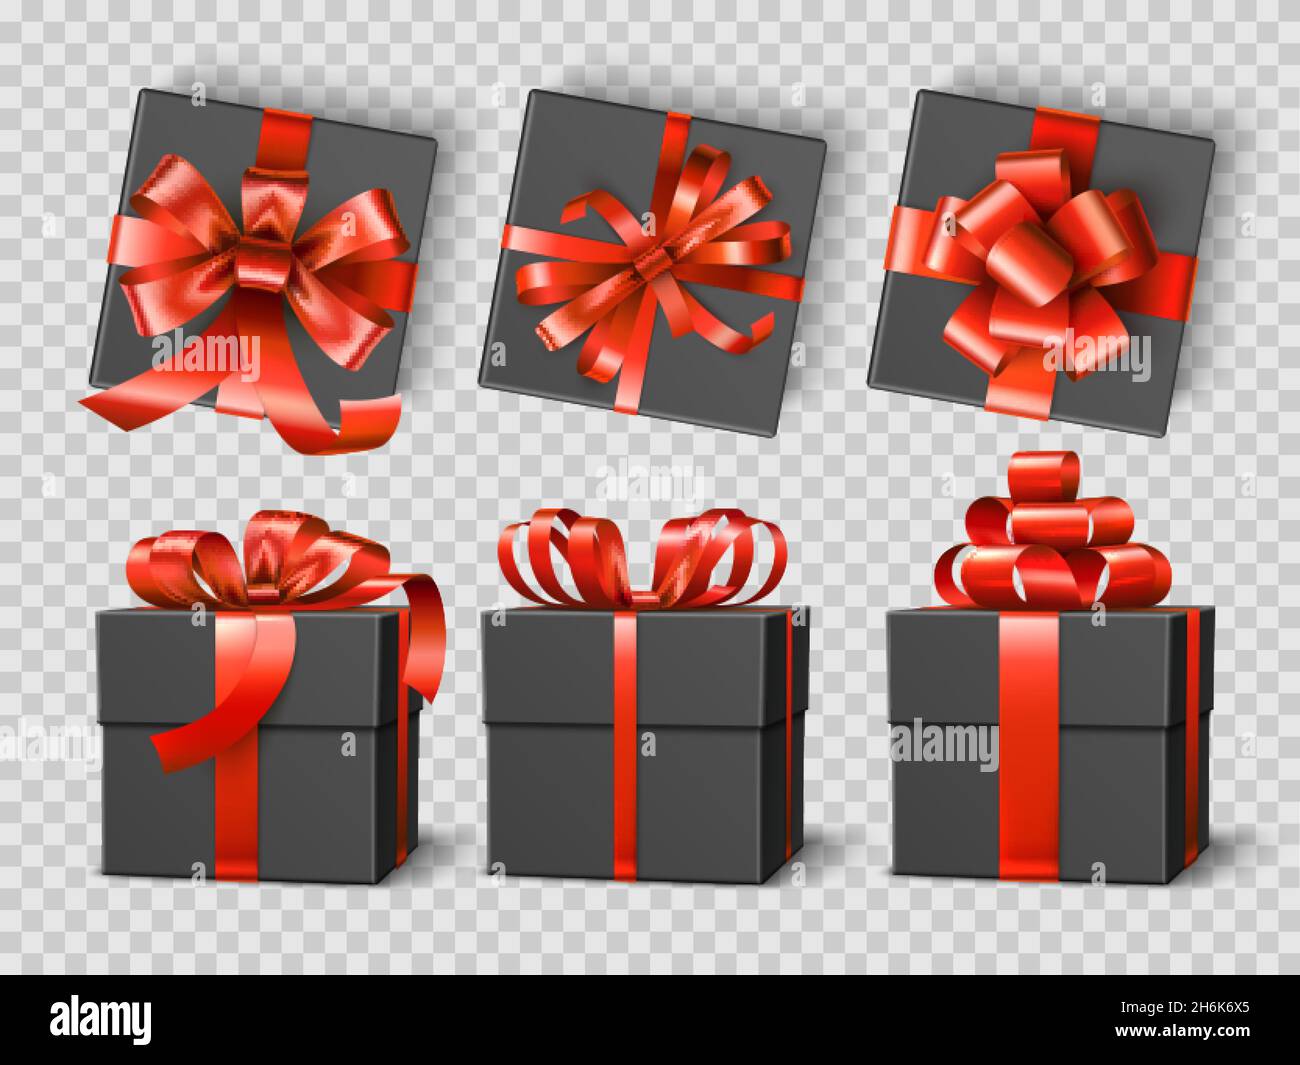 Black gift boxes. Realistic festive presents wraps mockup, red satin ribbons with differently tied bows, elegant dark packaging. Vector set Stock Vector